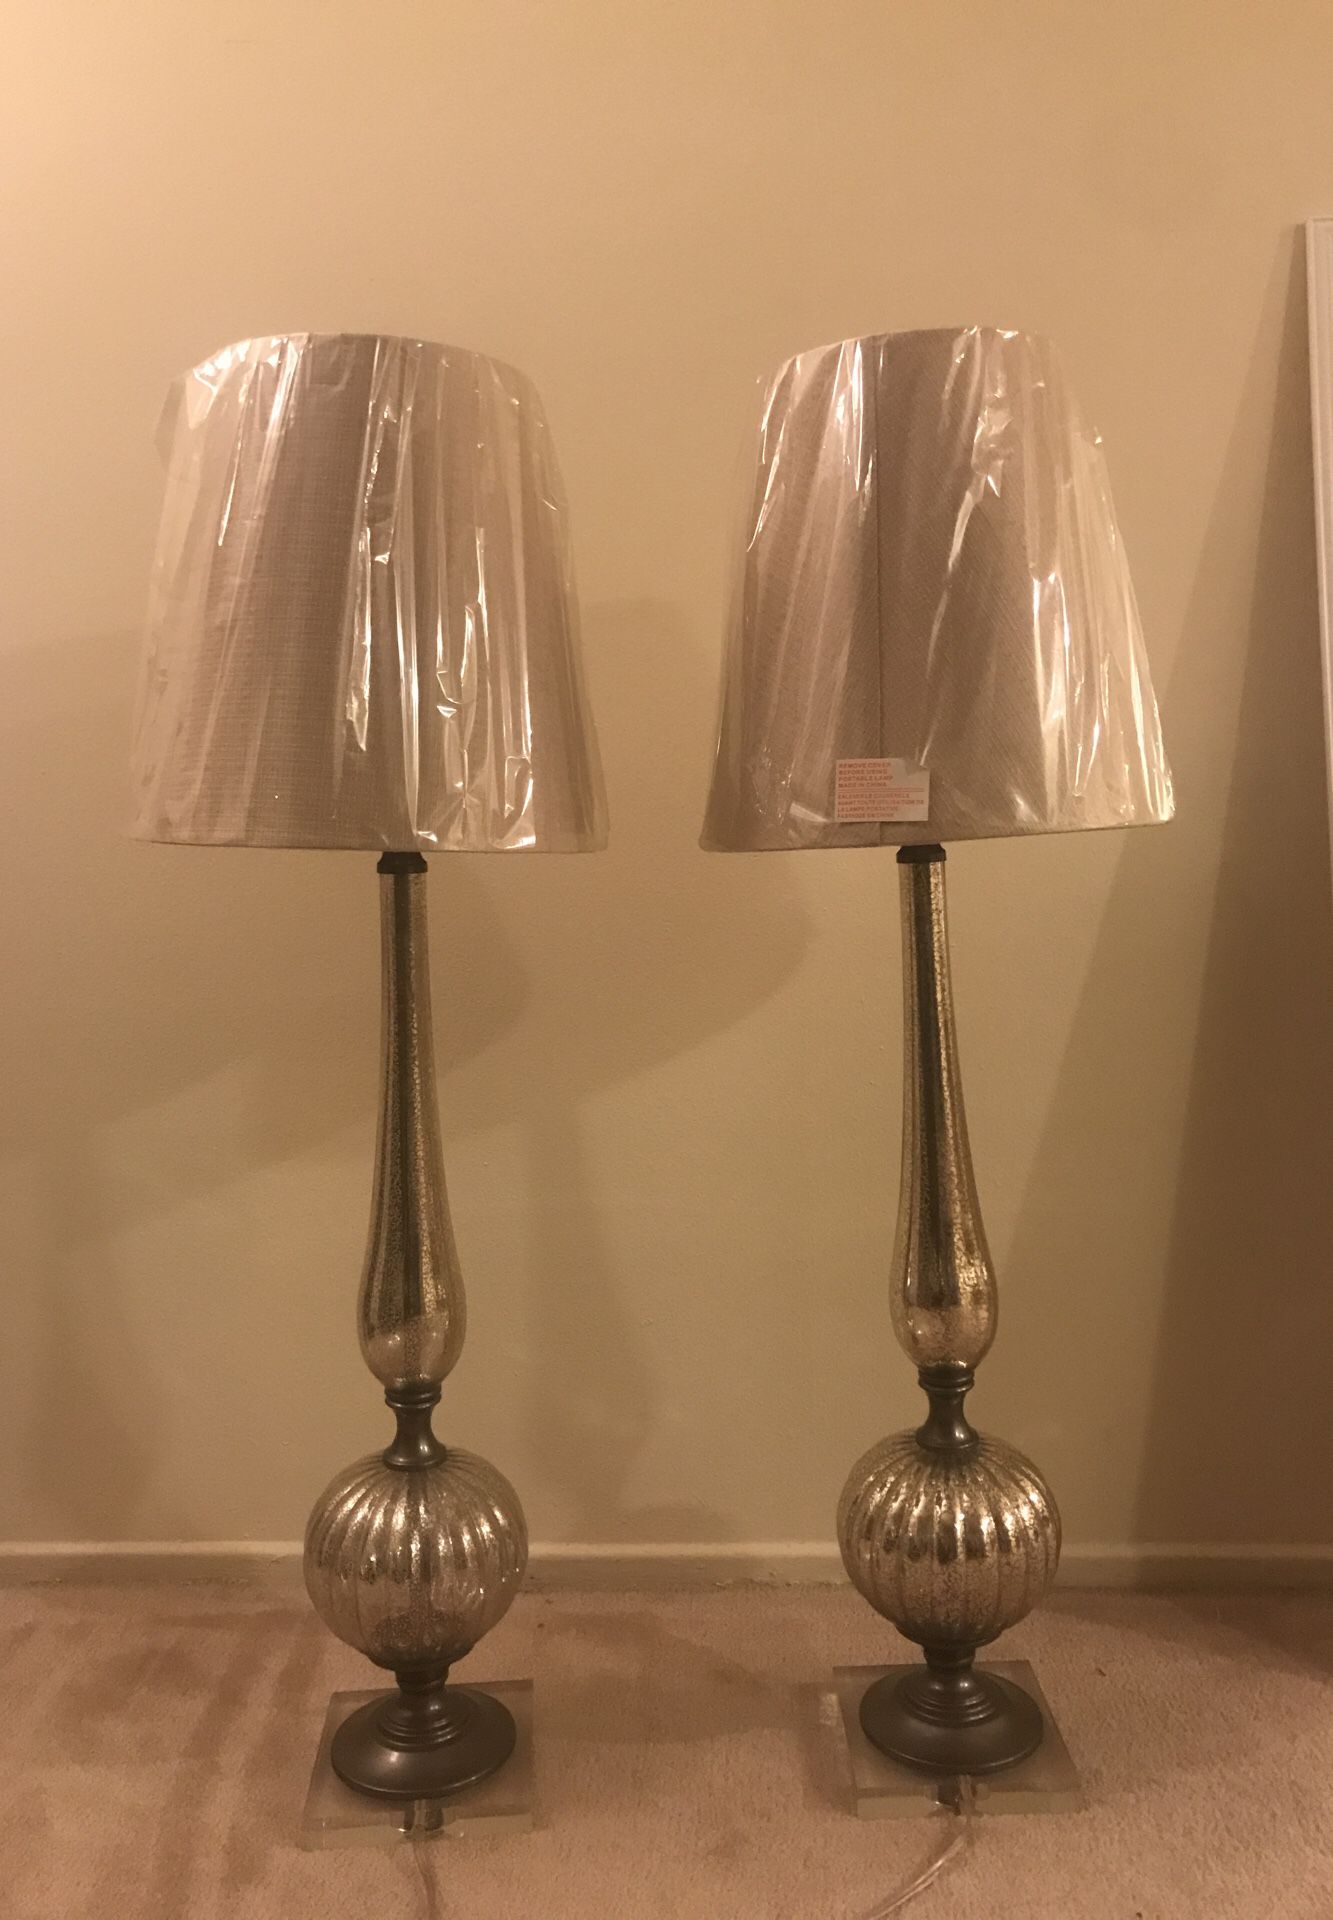 FREE!!! New without plastic Mercury glass lamps